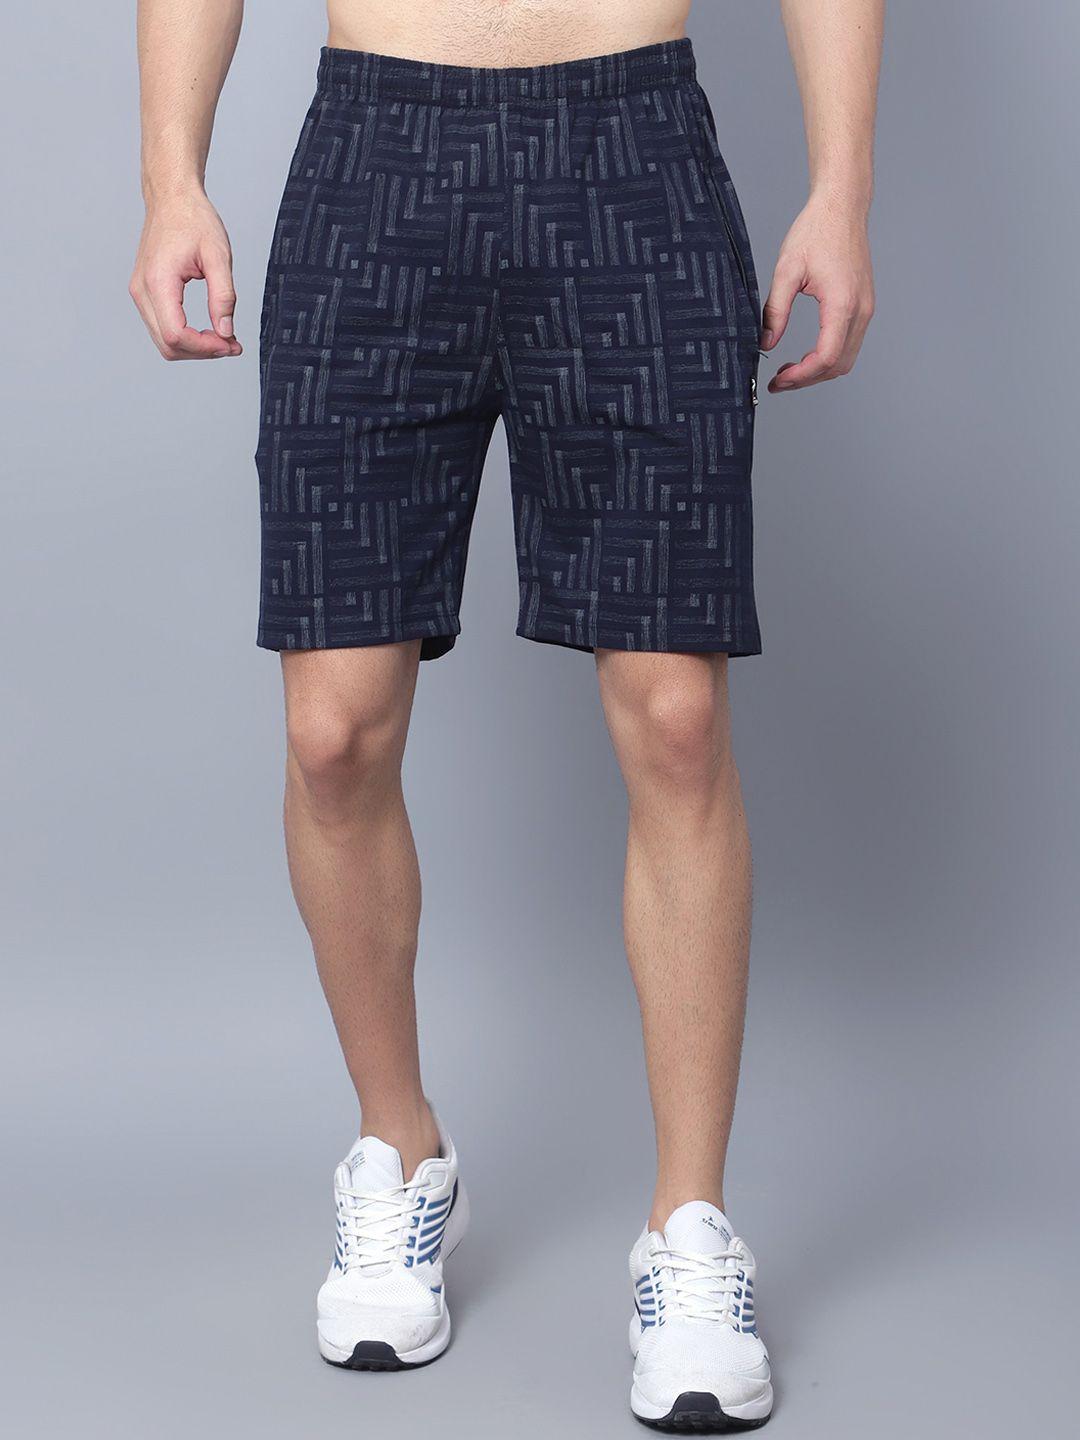 sky heights men geometric printed cotton training or gym sports shorts